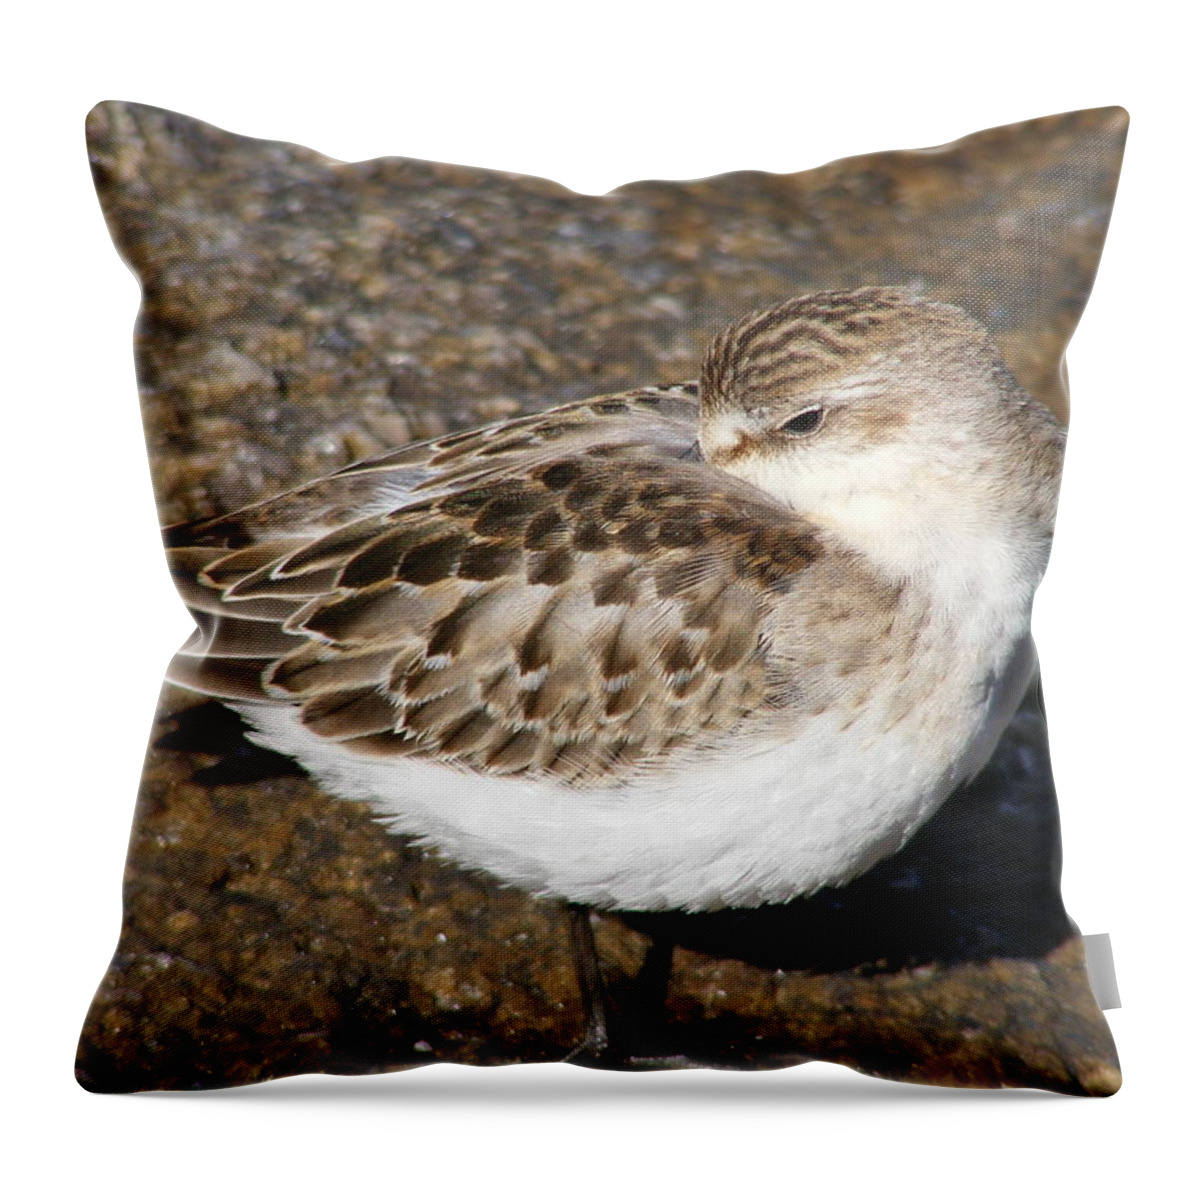 Sandpiper Throw Pillow featuring the photograph Sandpiper by Doug Mills